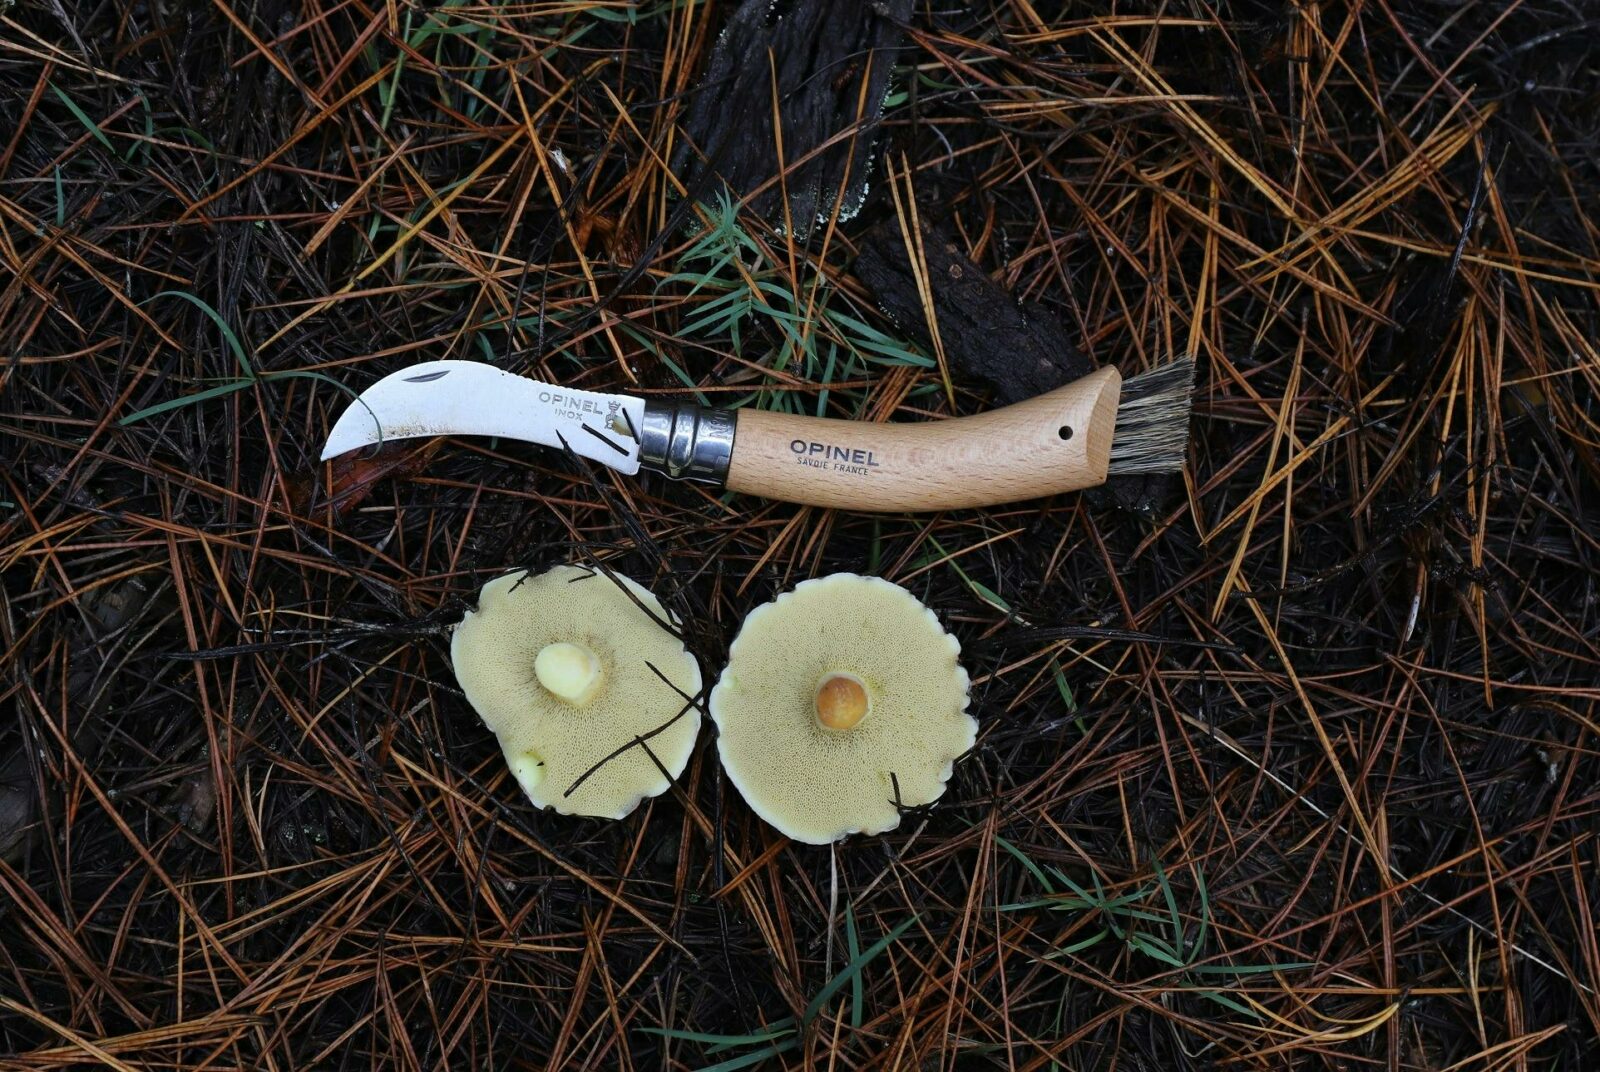 Two wild mushrooms and a mushrooming knife lying on pine needles